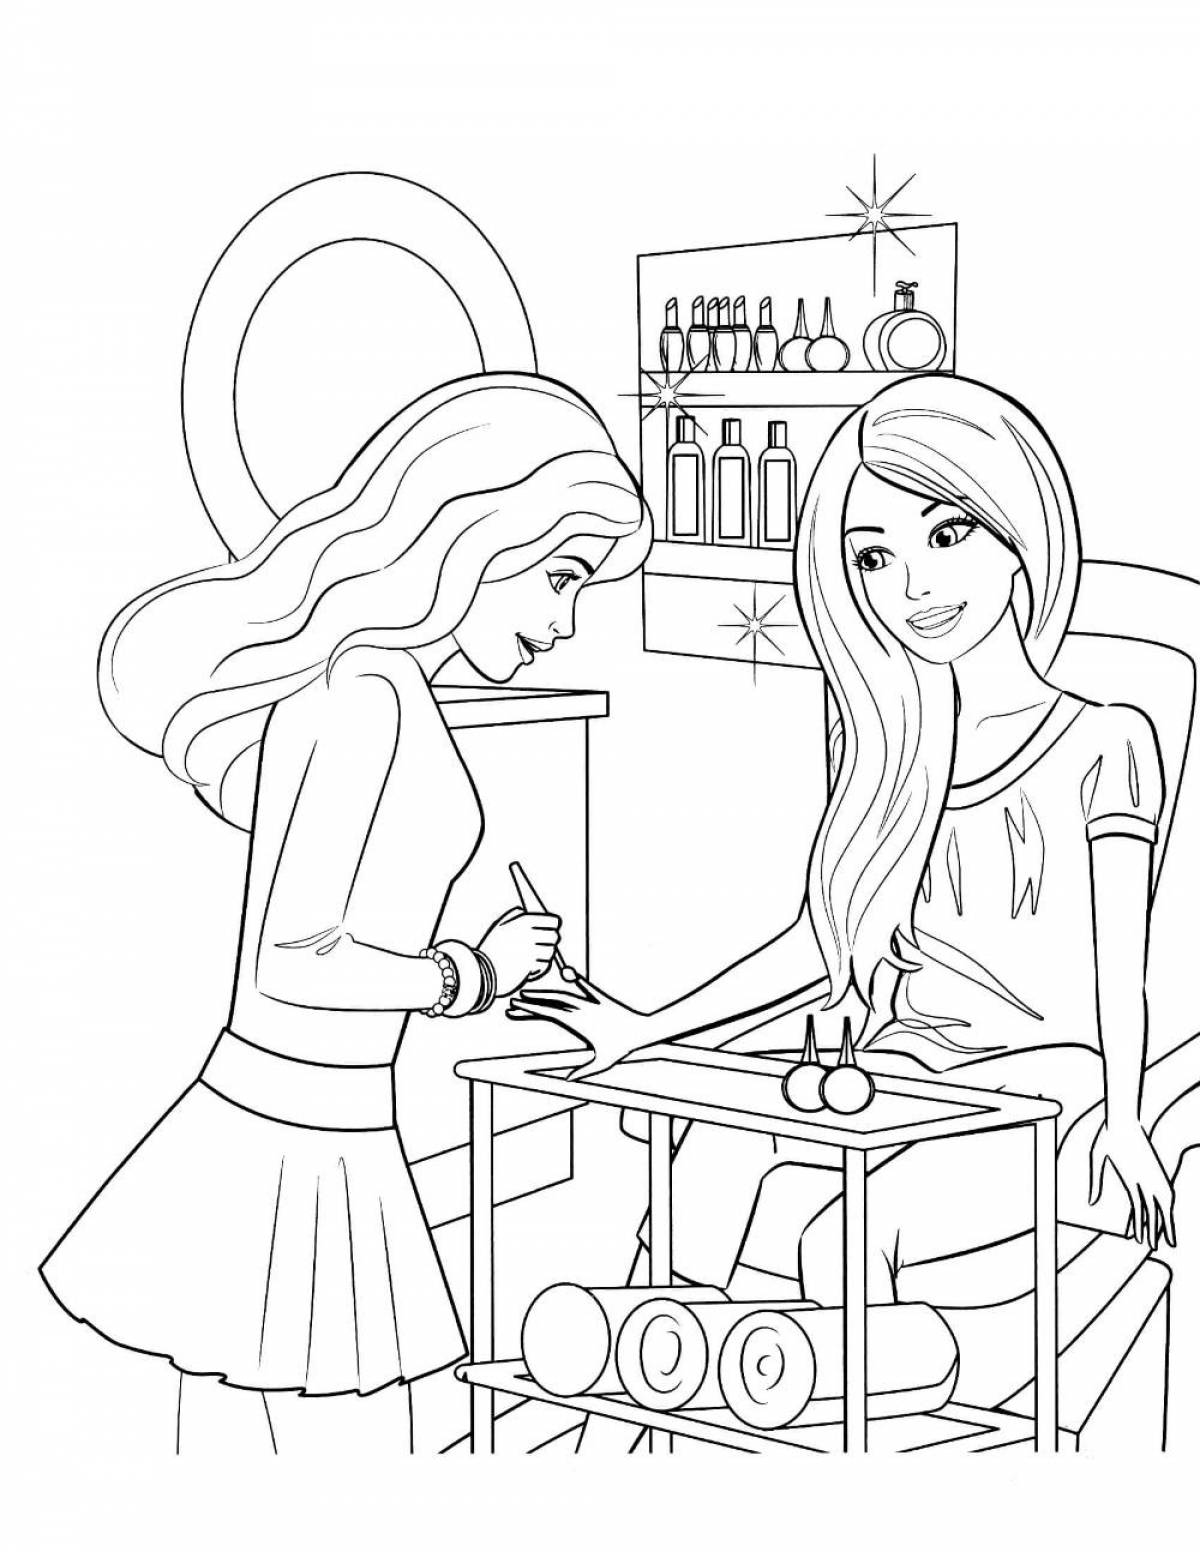 Barbie fairytale coloring book for kids